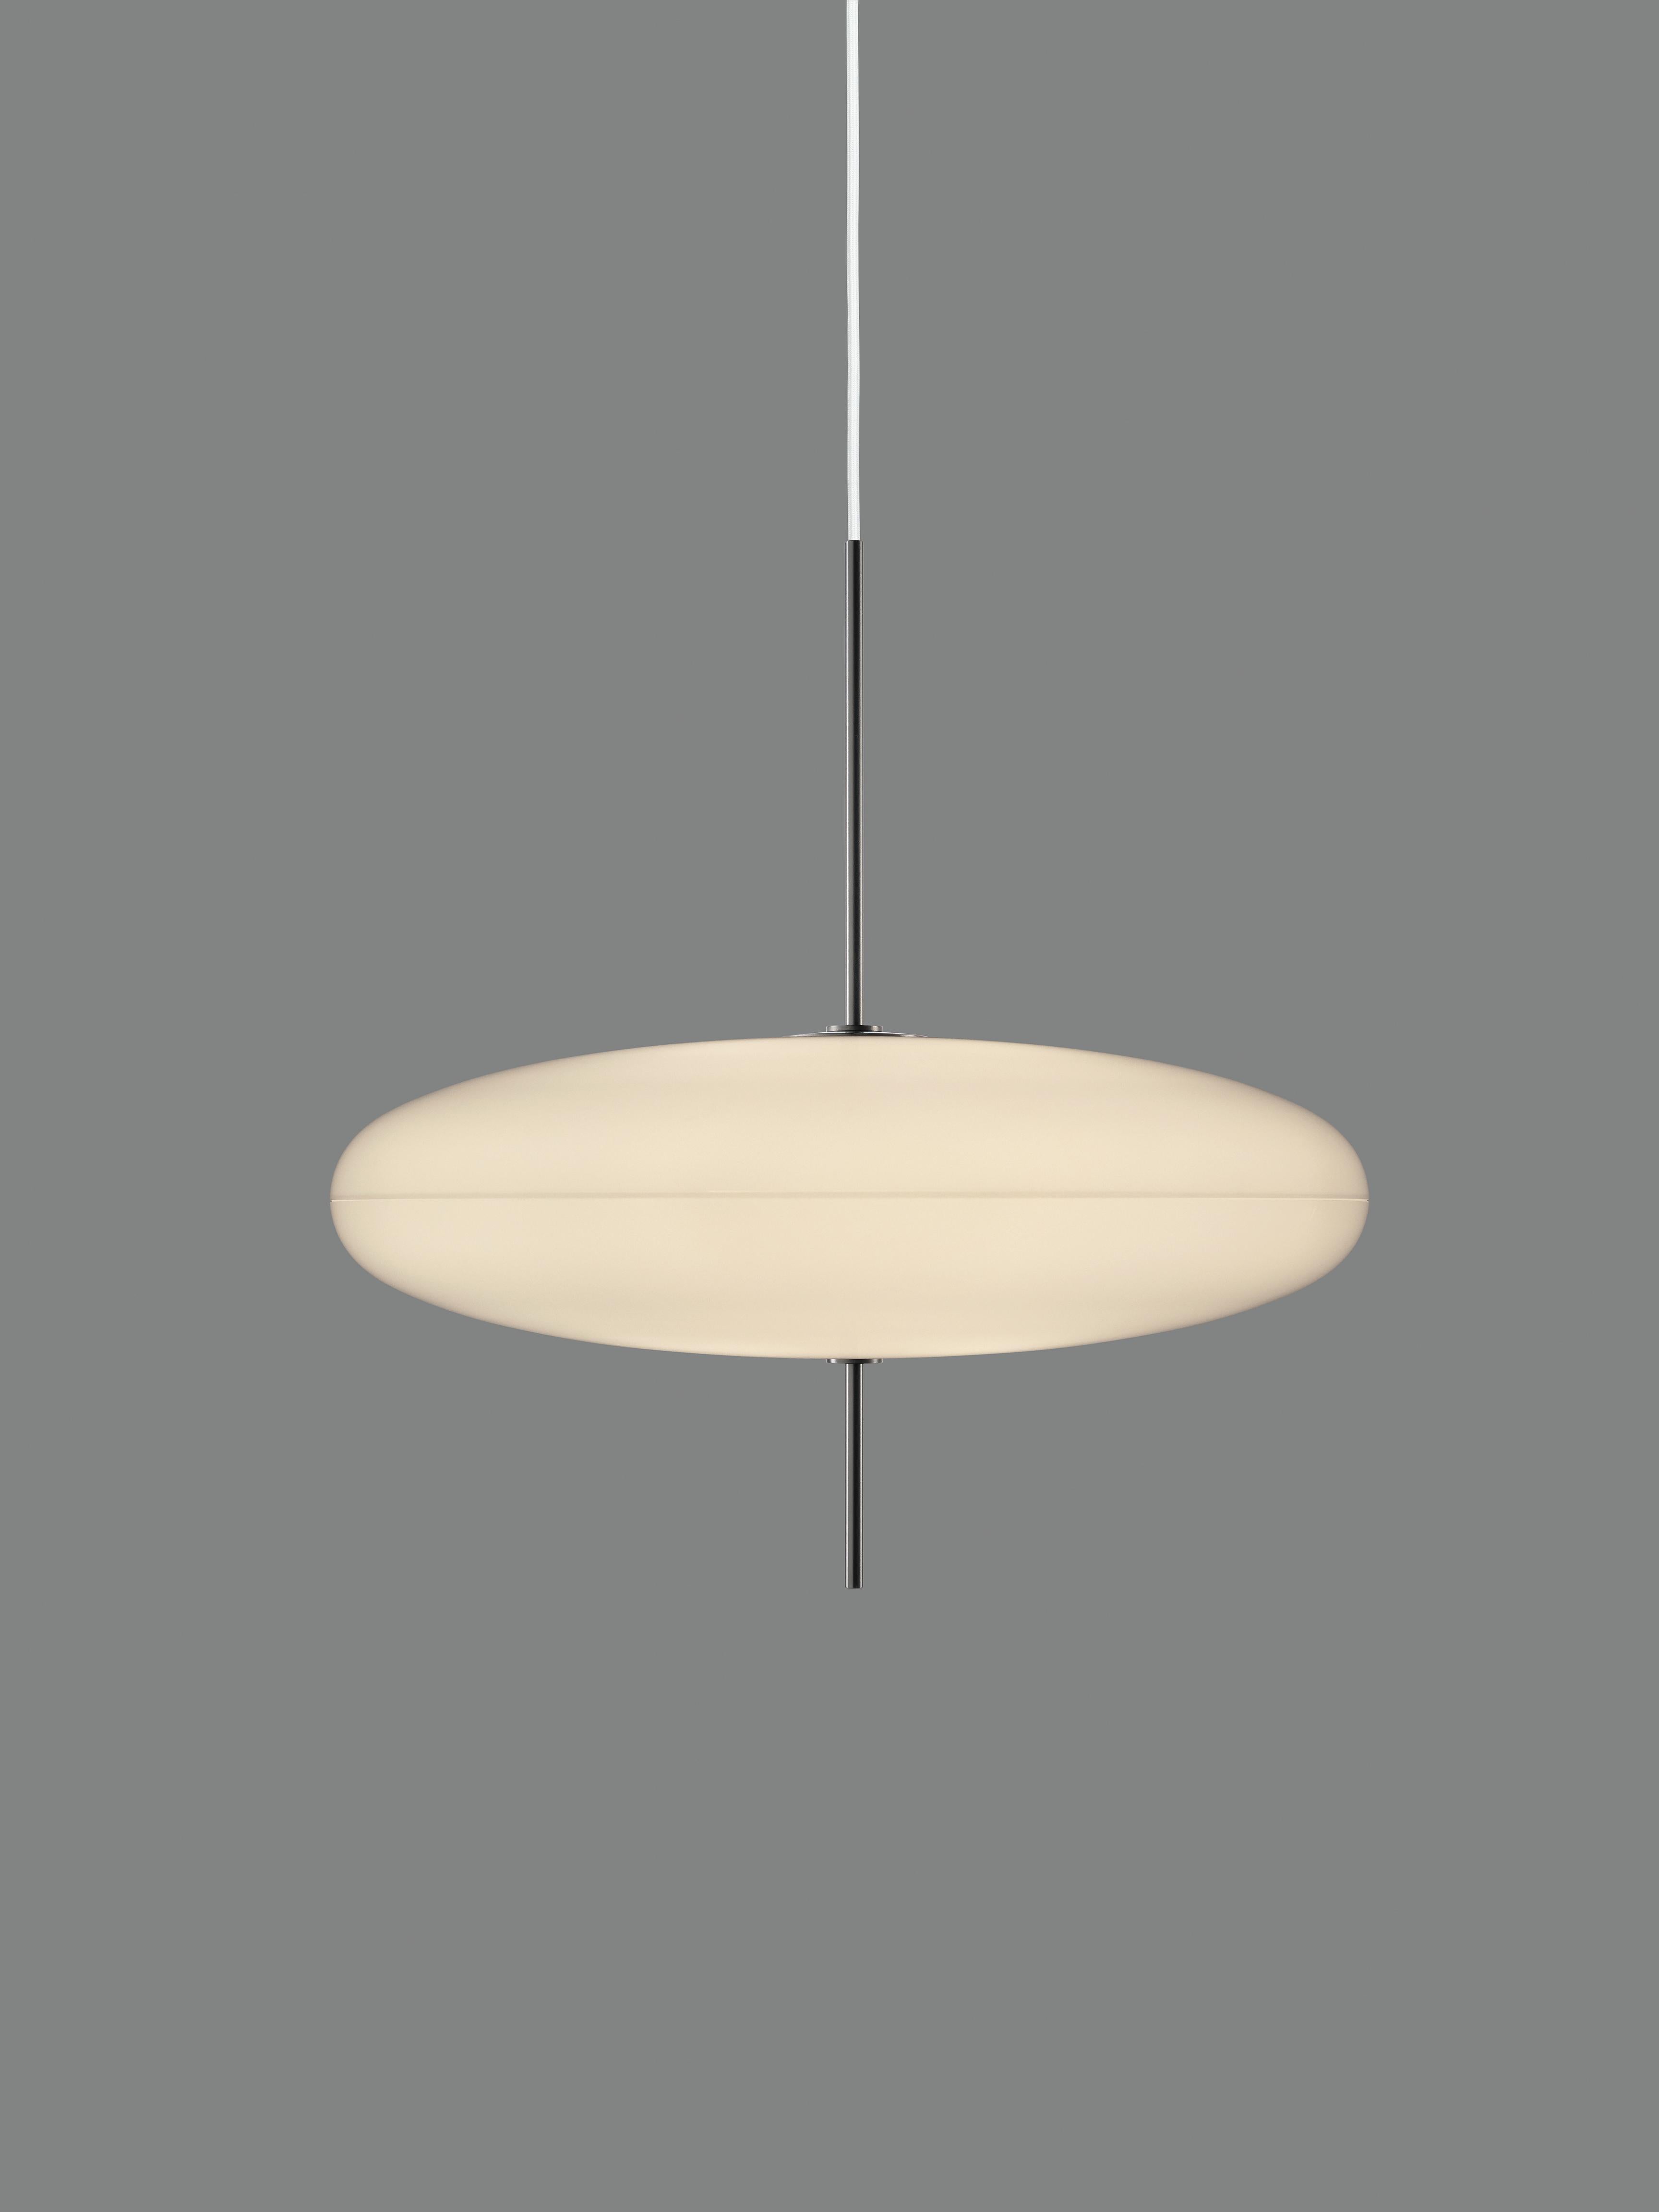 Painted Gino Sarfatti Model No. 2065 Ceiling Light in Black and White